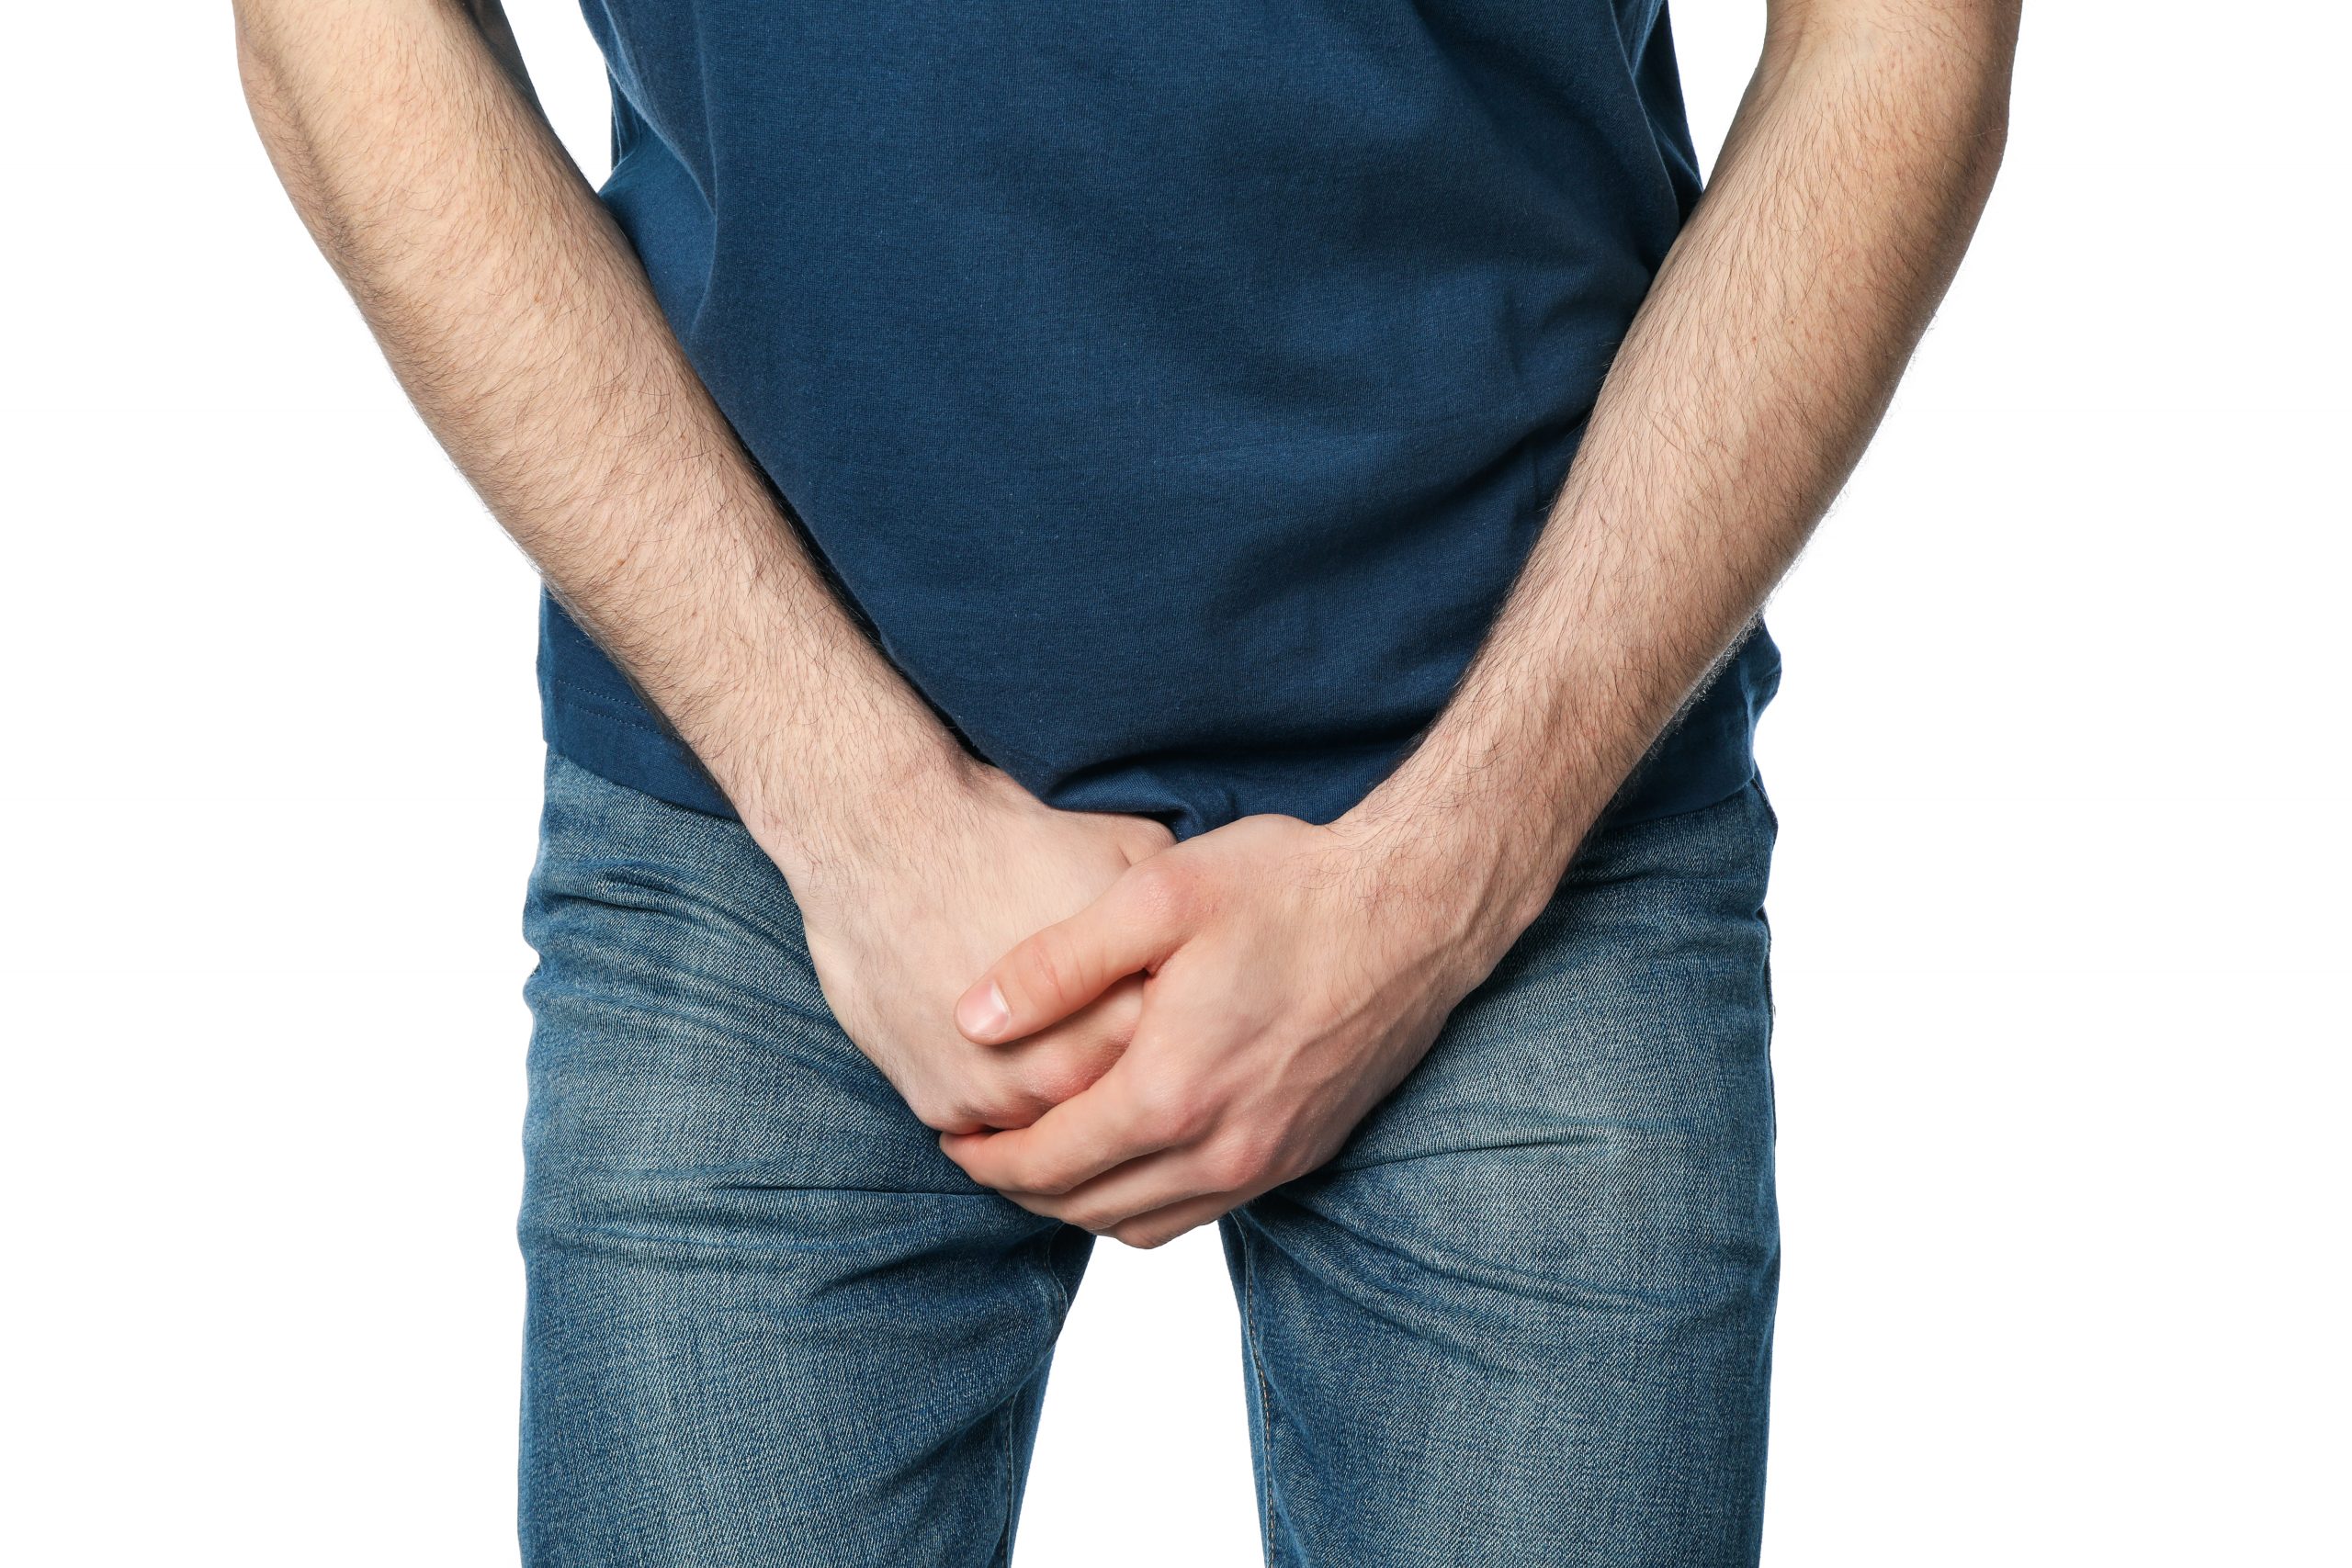 Pain Where Bladder Is Located